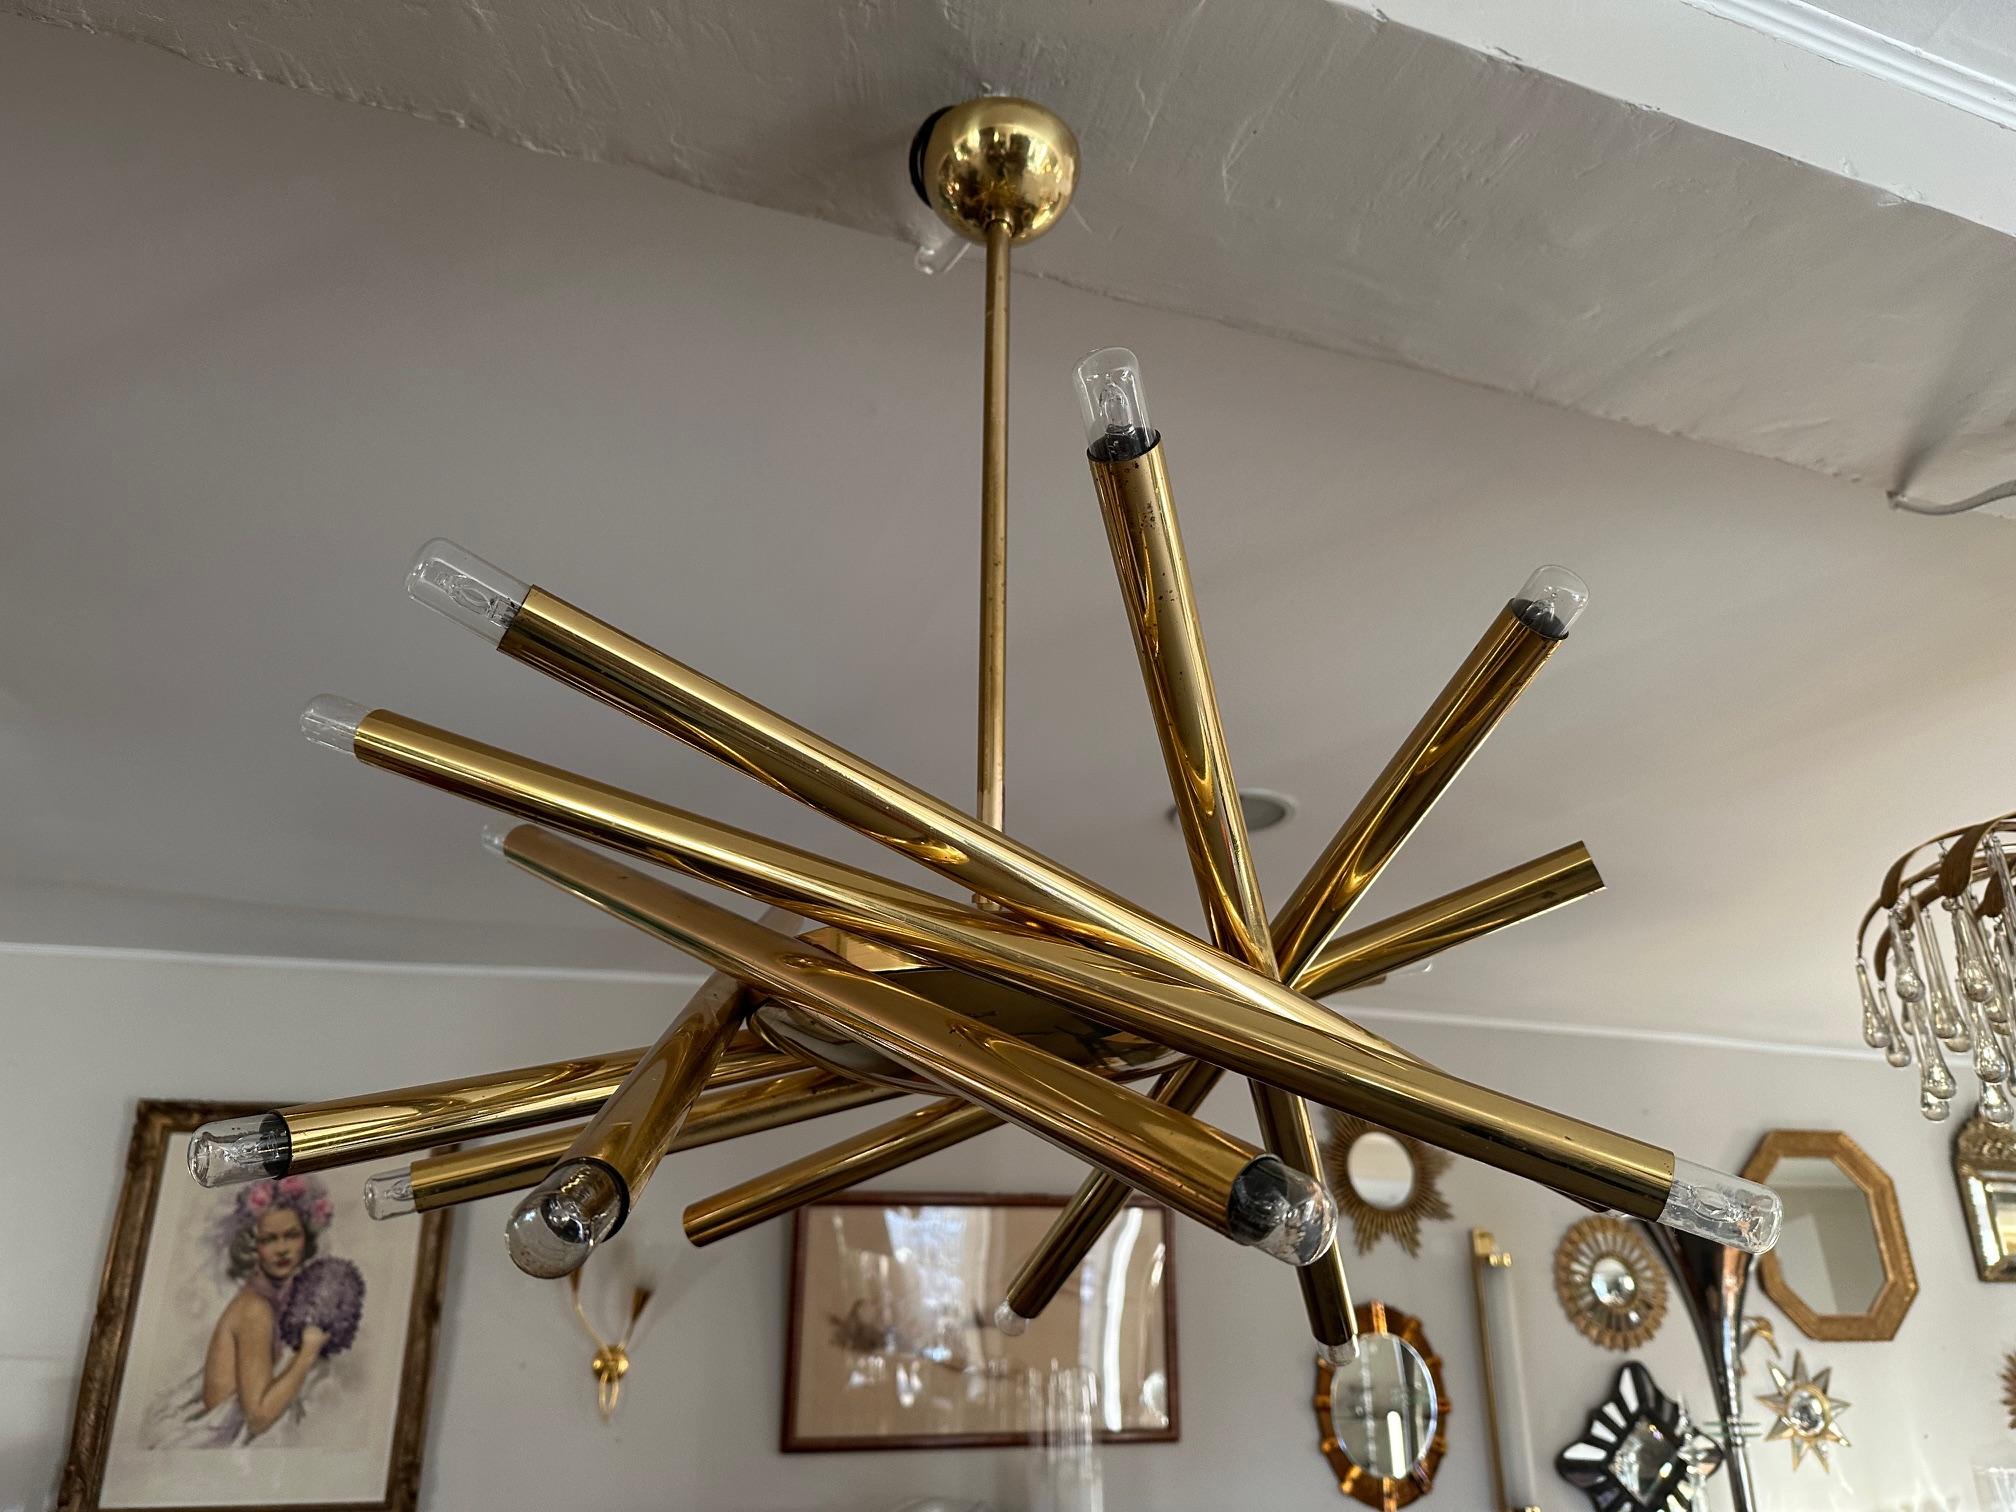 Stunning 1960s sputnik brass chandelier by Stilnovo in brass. 
Represents intertwined brass tubes like mikados. 
Superb quality and rare model. Illuminates perfectly.
​